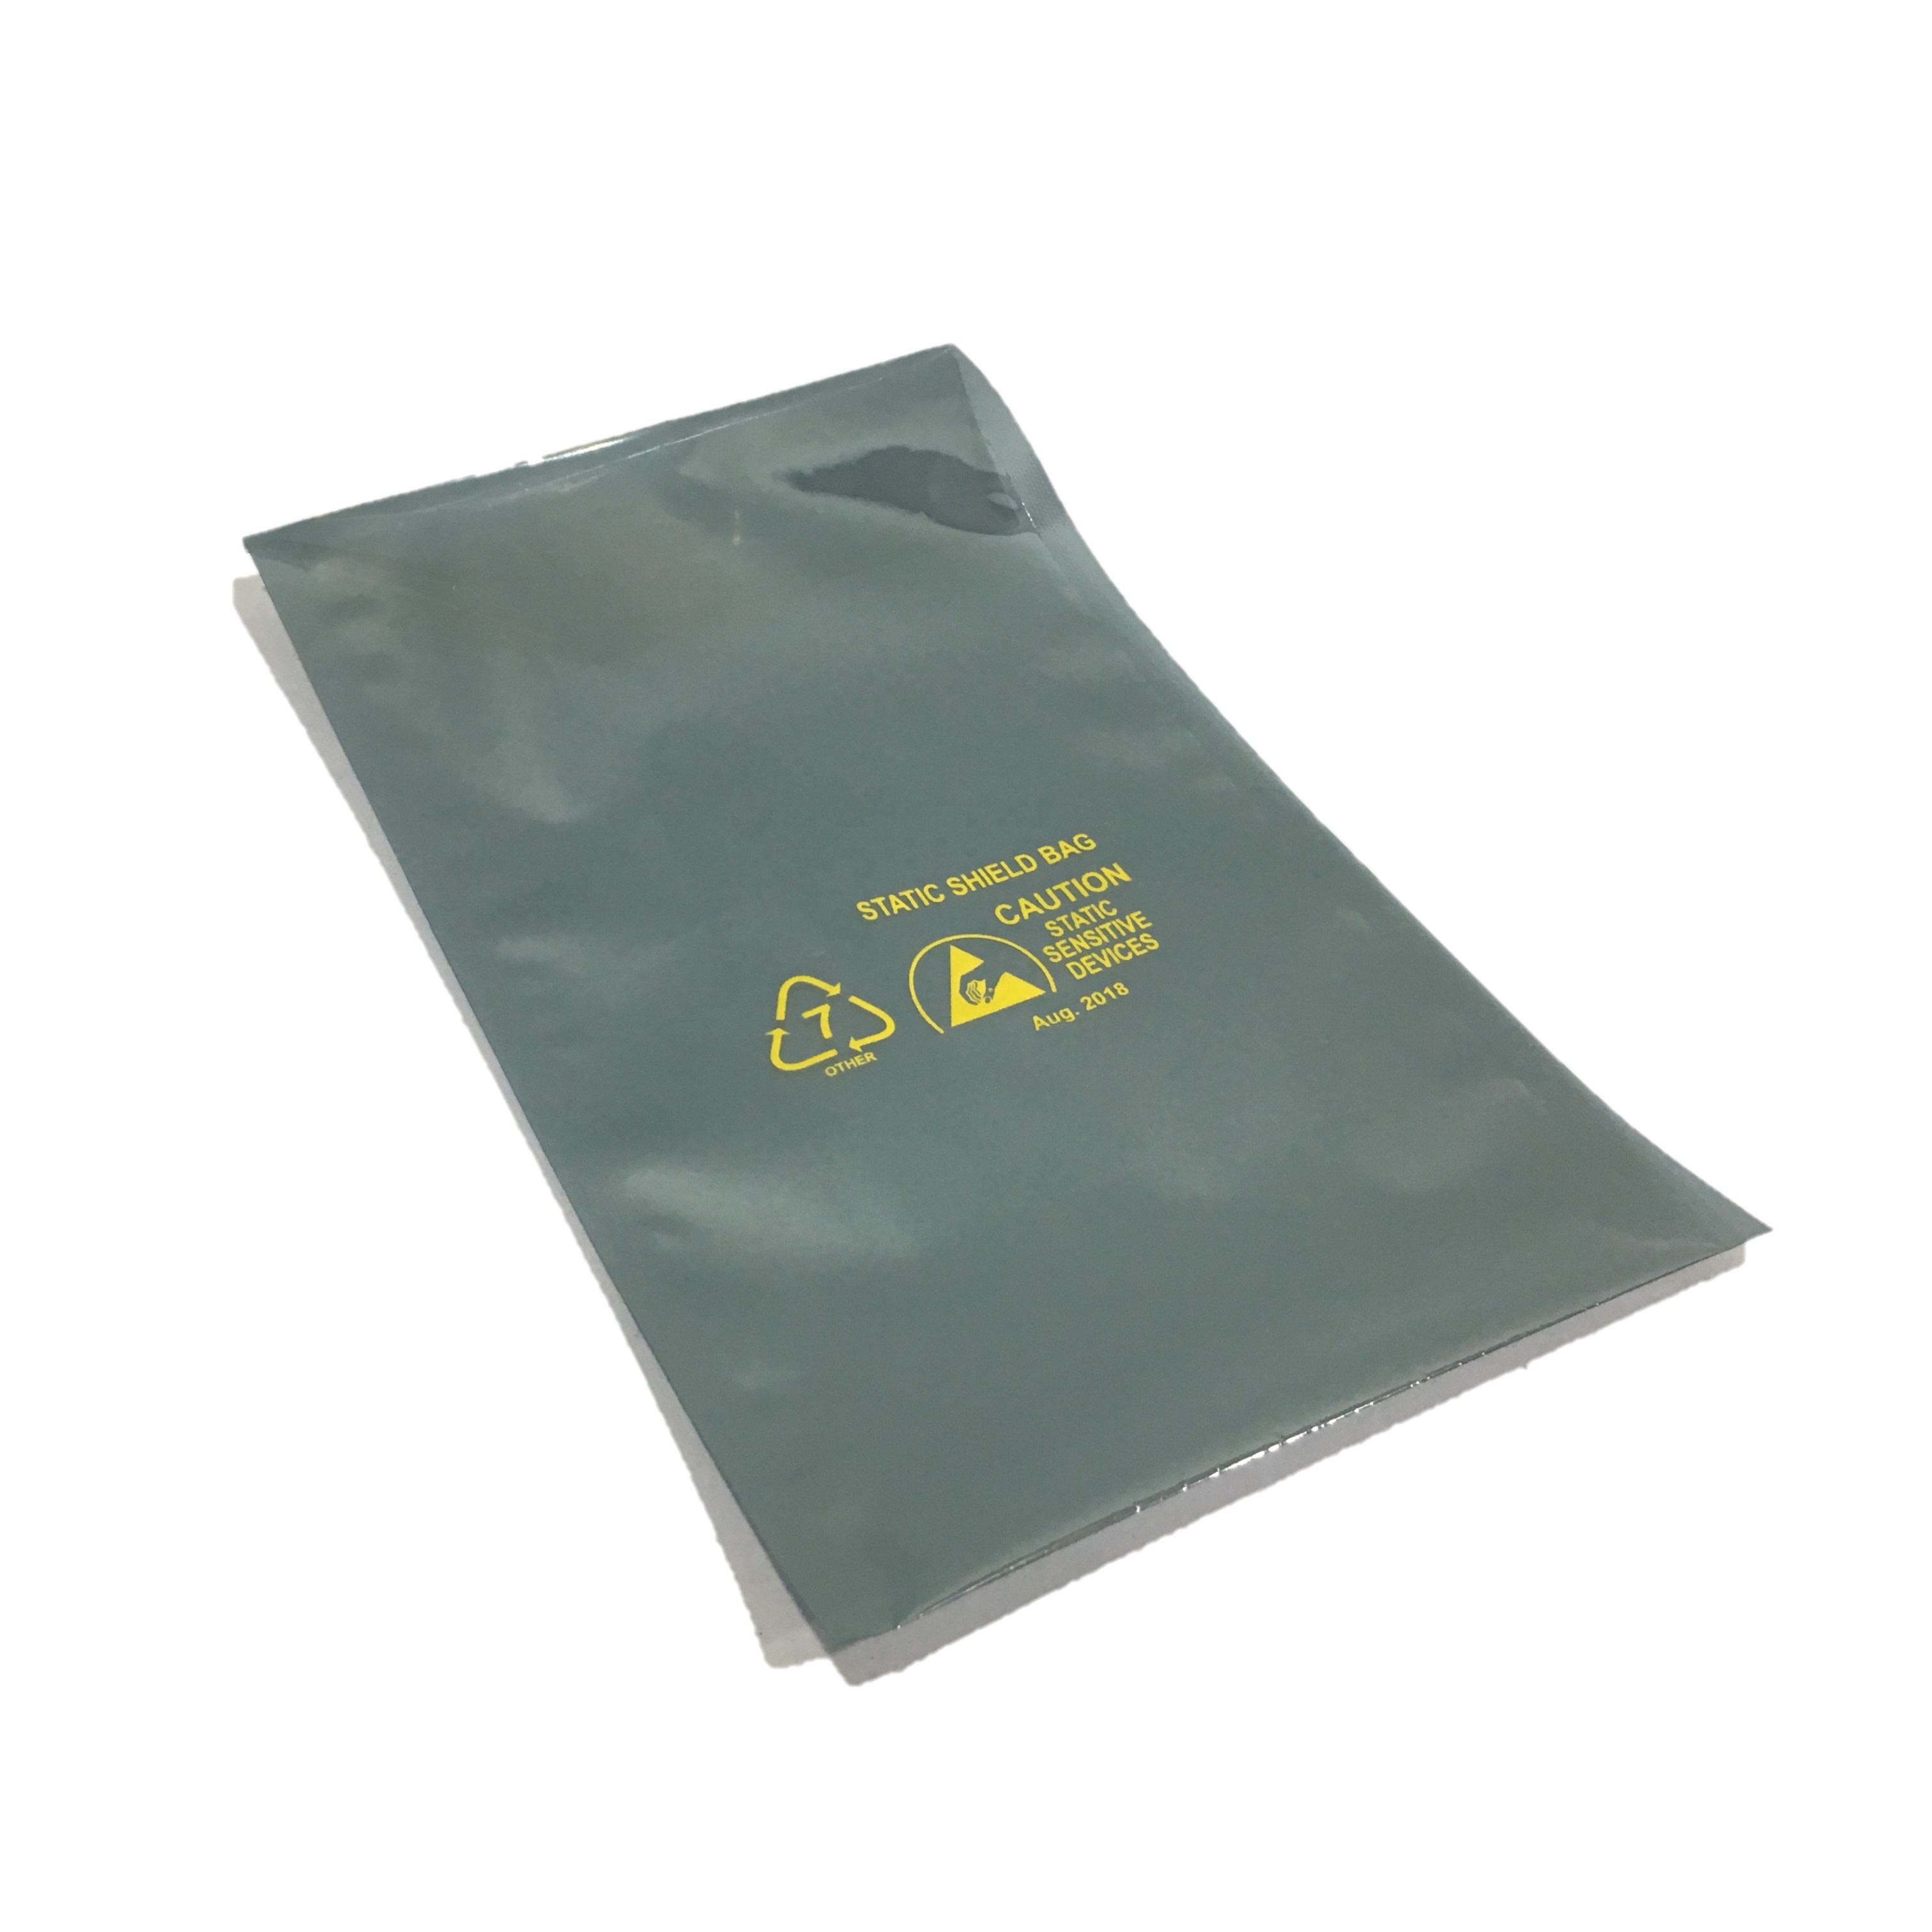 4*6 inch Anti-static bag/ Static shielding bag/ ESD barrier bag for clean room and electronic products